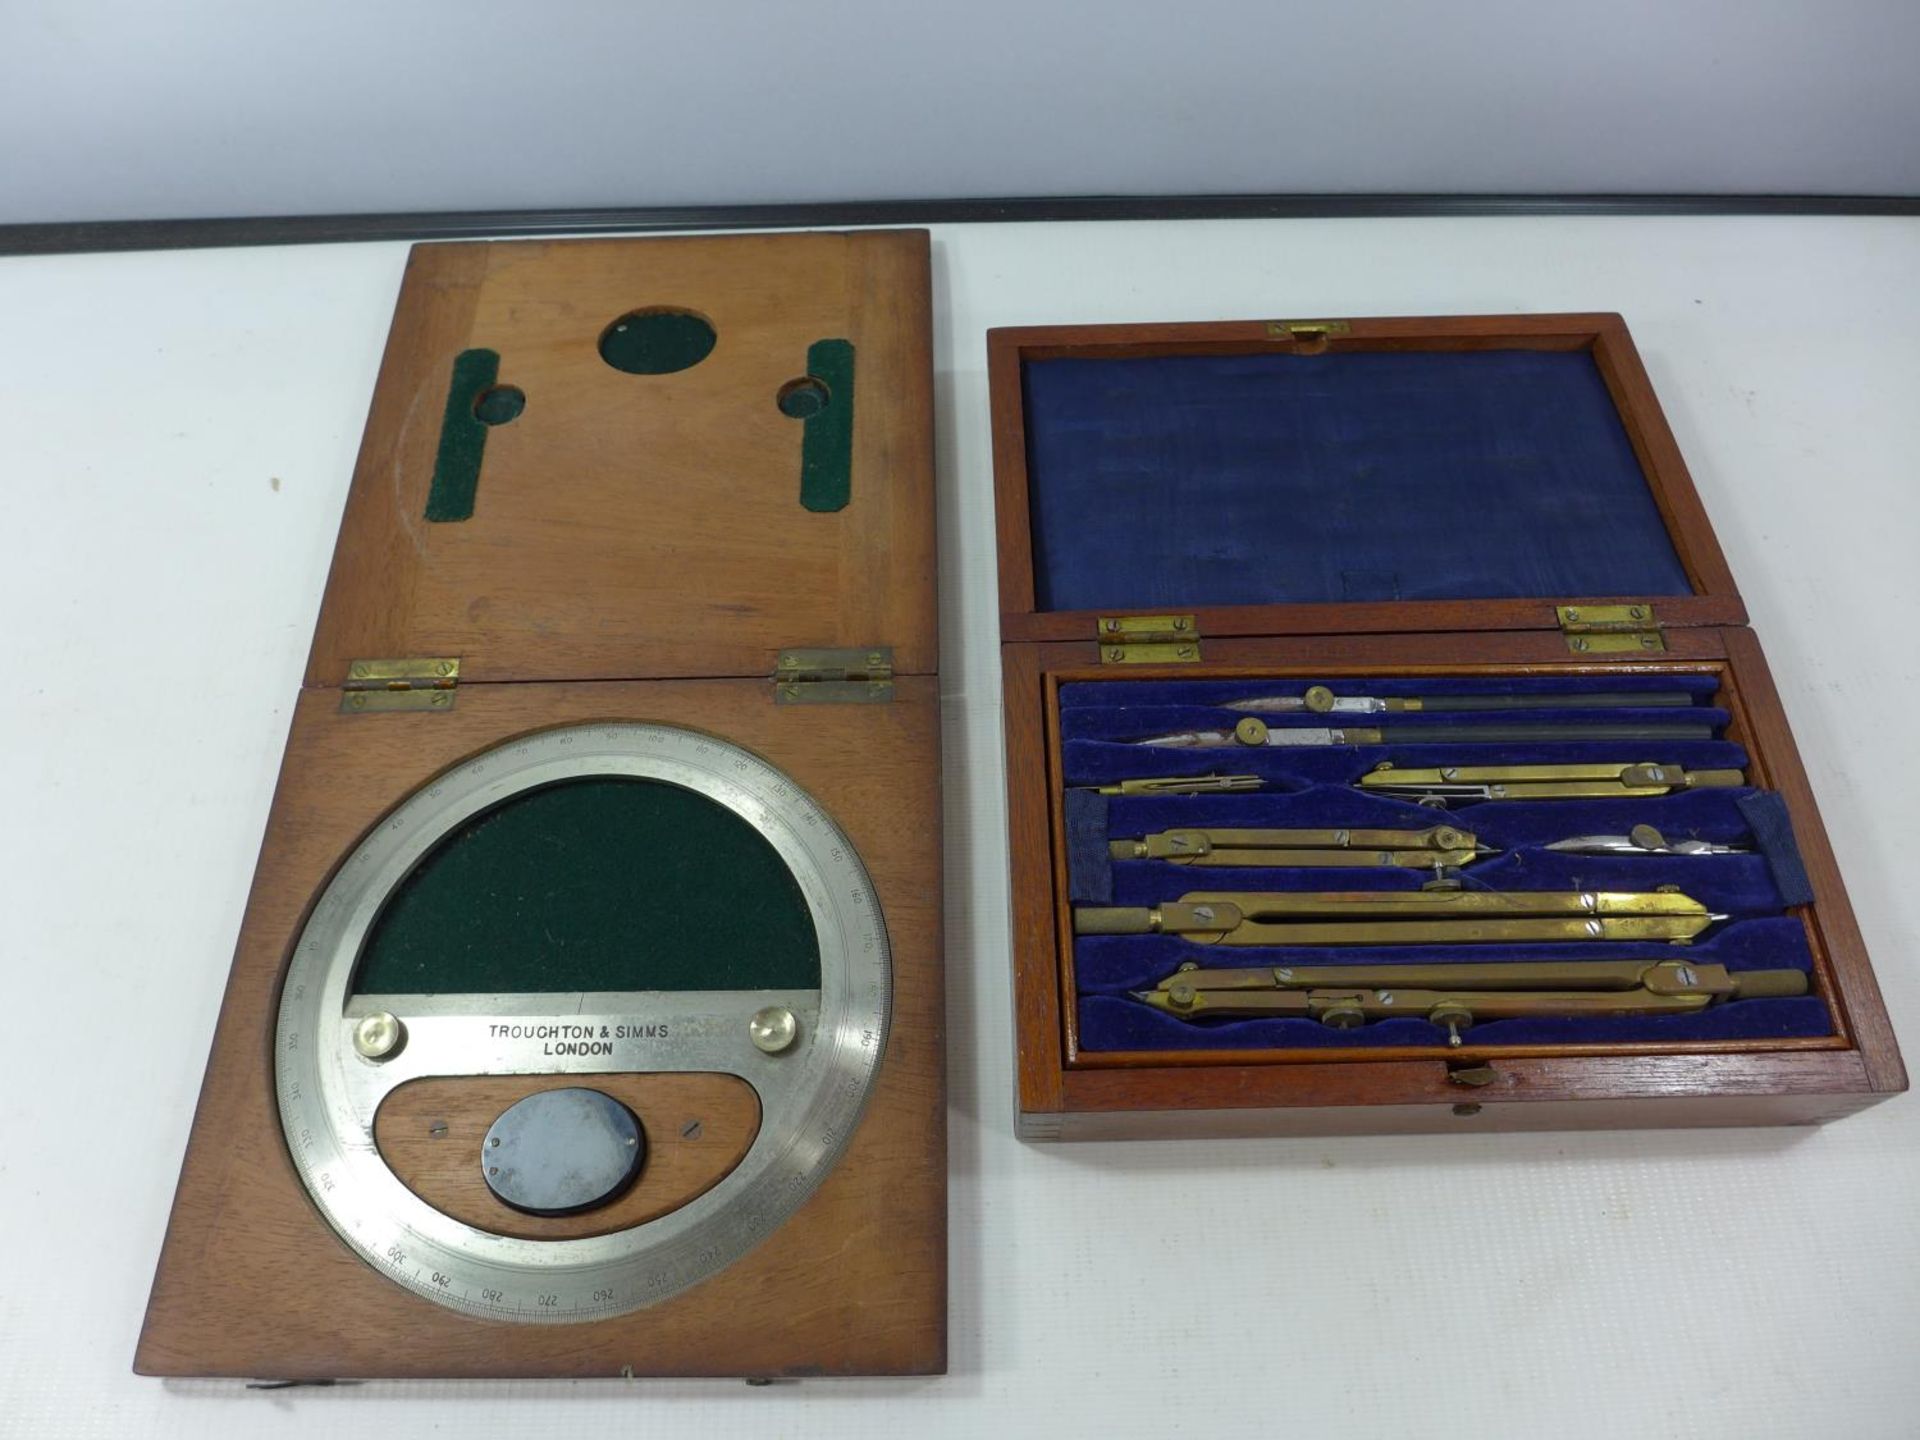 A CASED SET OF DRAWING INSTRUMENTS AND A CASED TROUGHTON AND SIMMS OF LONDON DEGREE RING AND